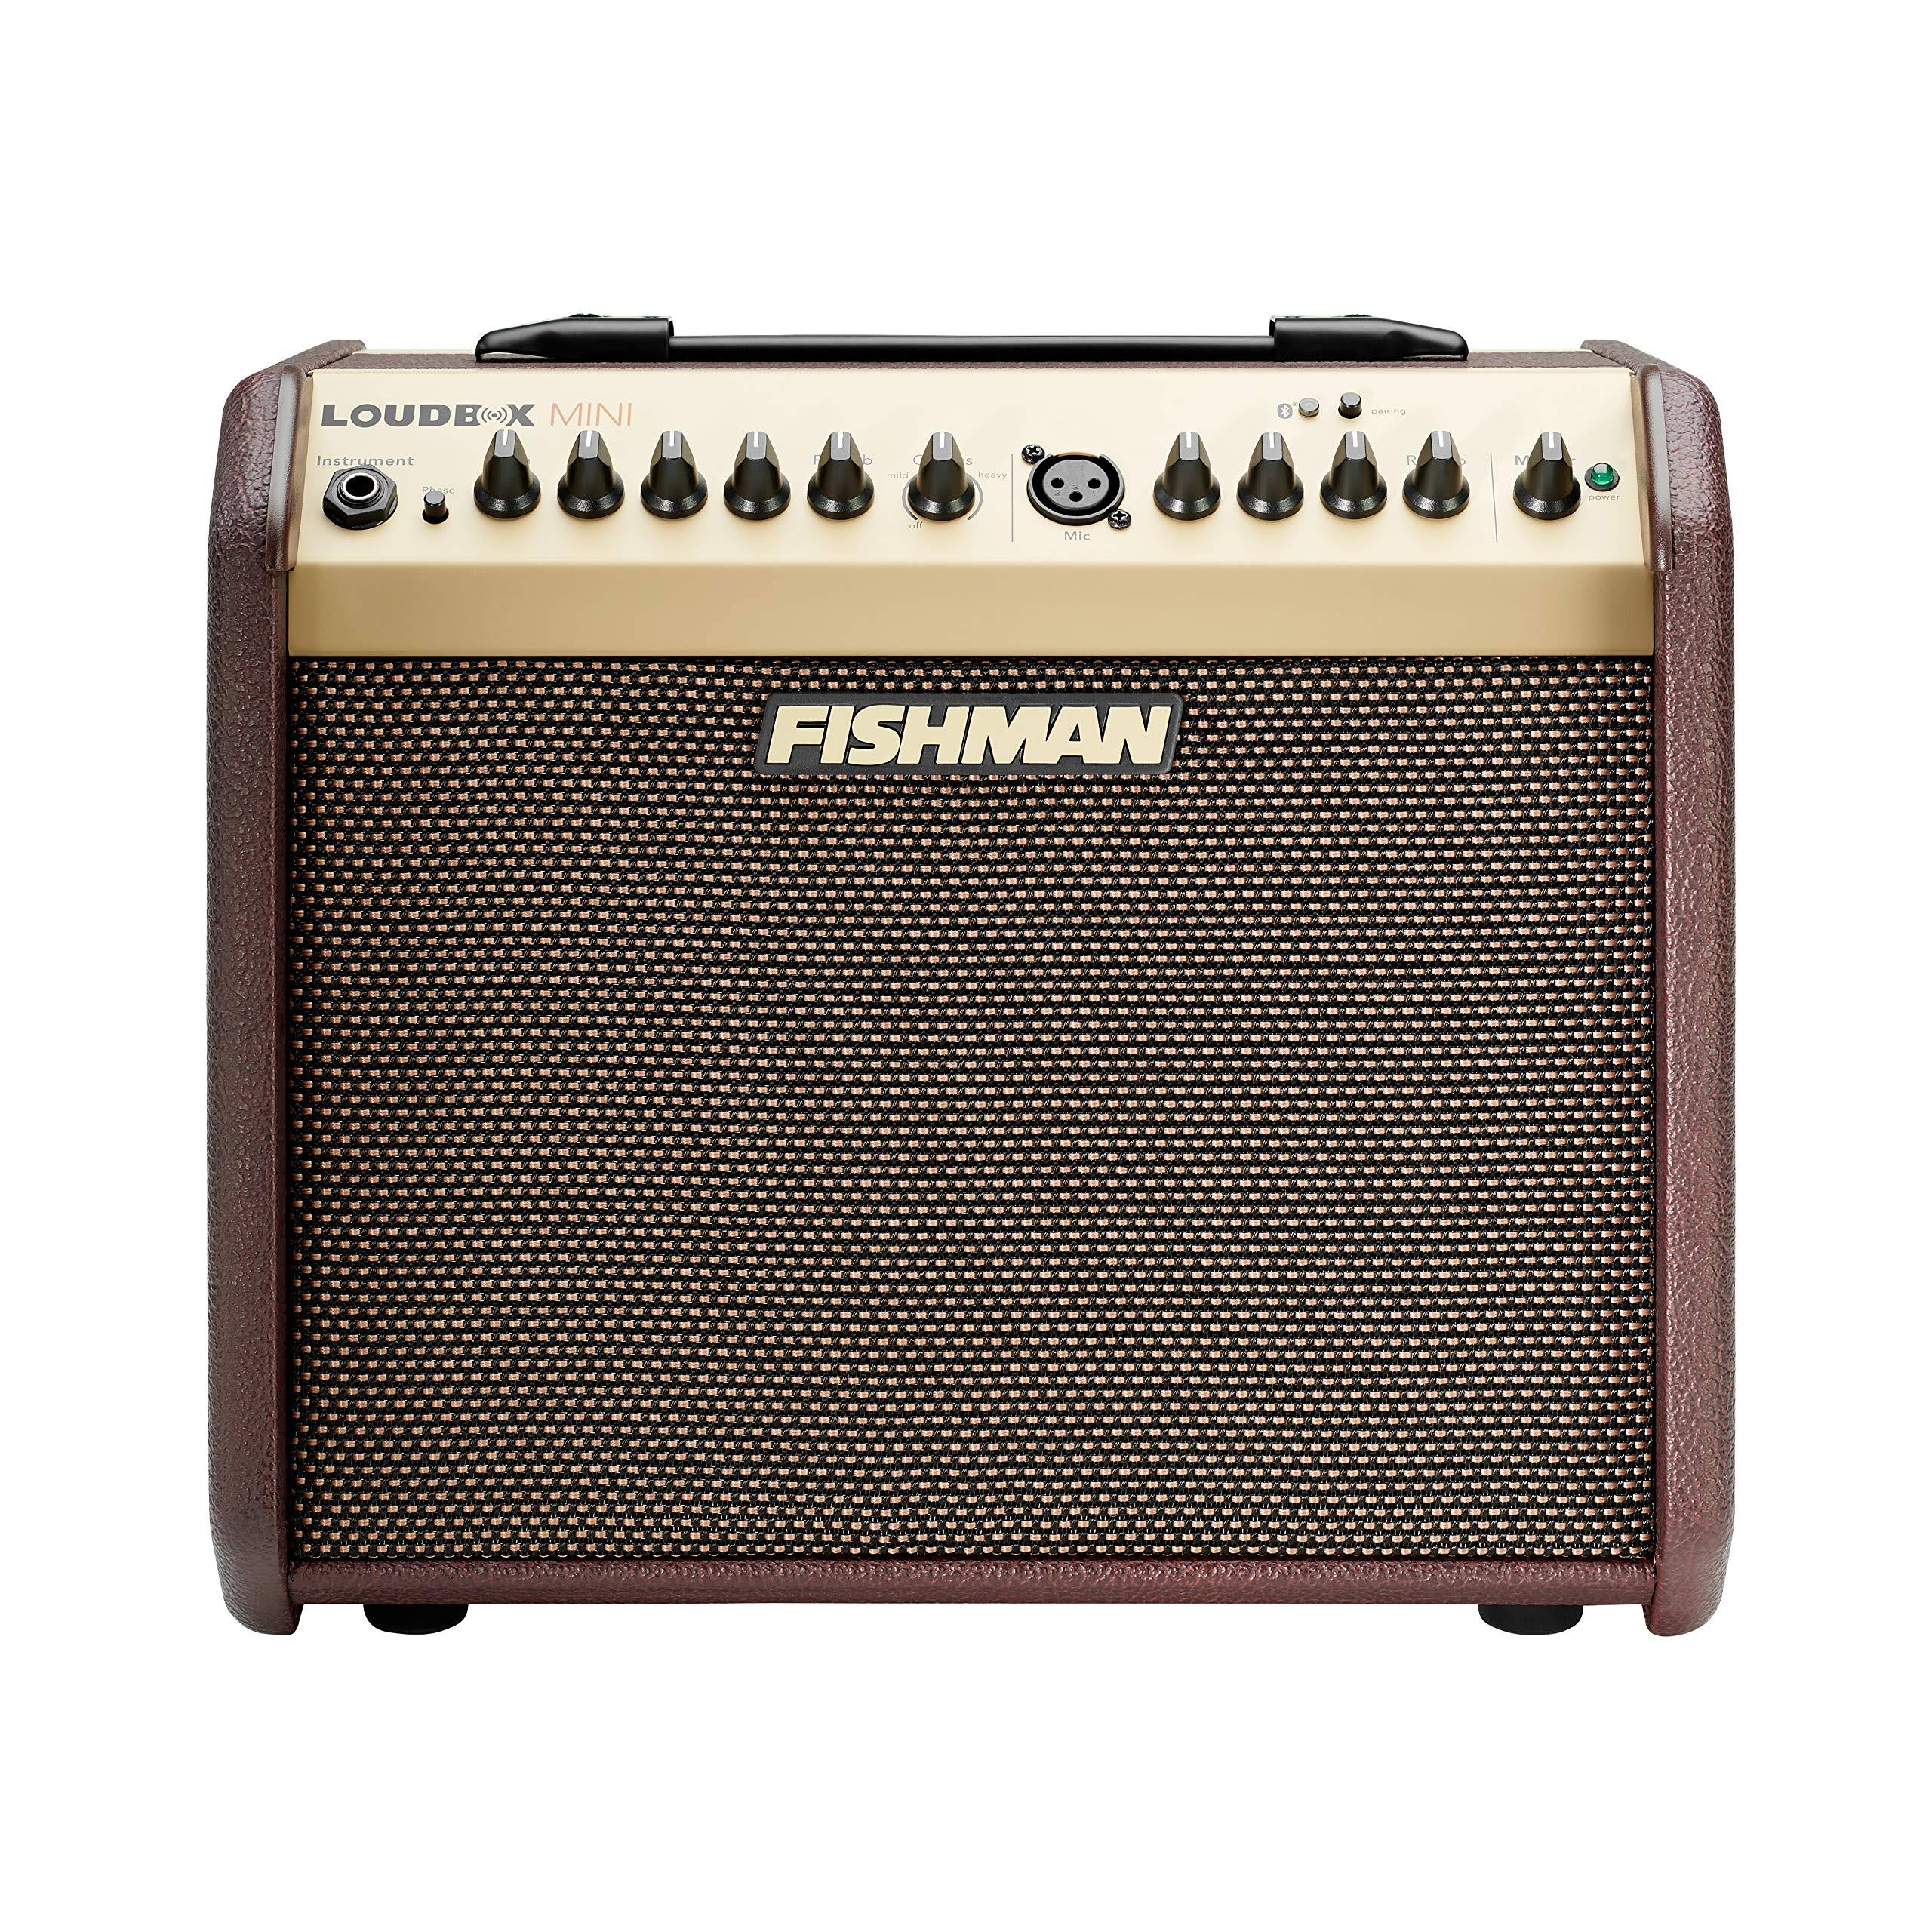 Fishman Loudbox Mini Bluetooth 60W Acoustic Combo Amplifier, Built In Effects, Channels 2 Channel, Solid State, Guitar